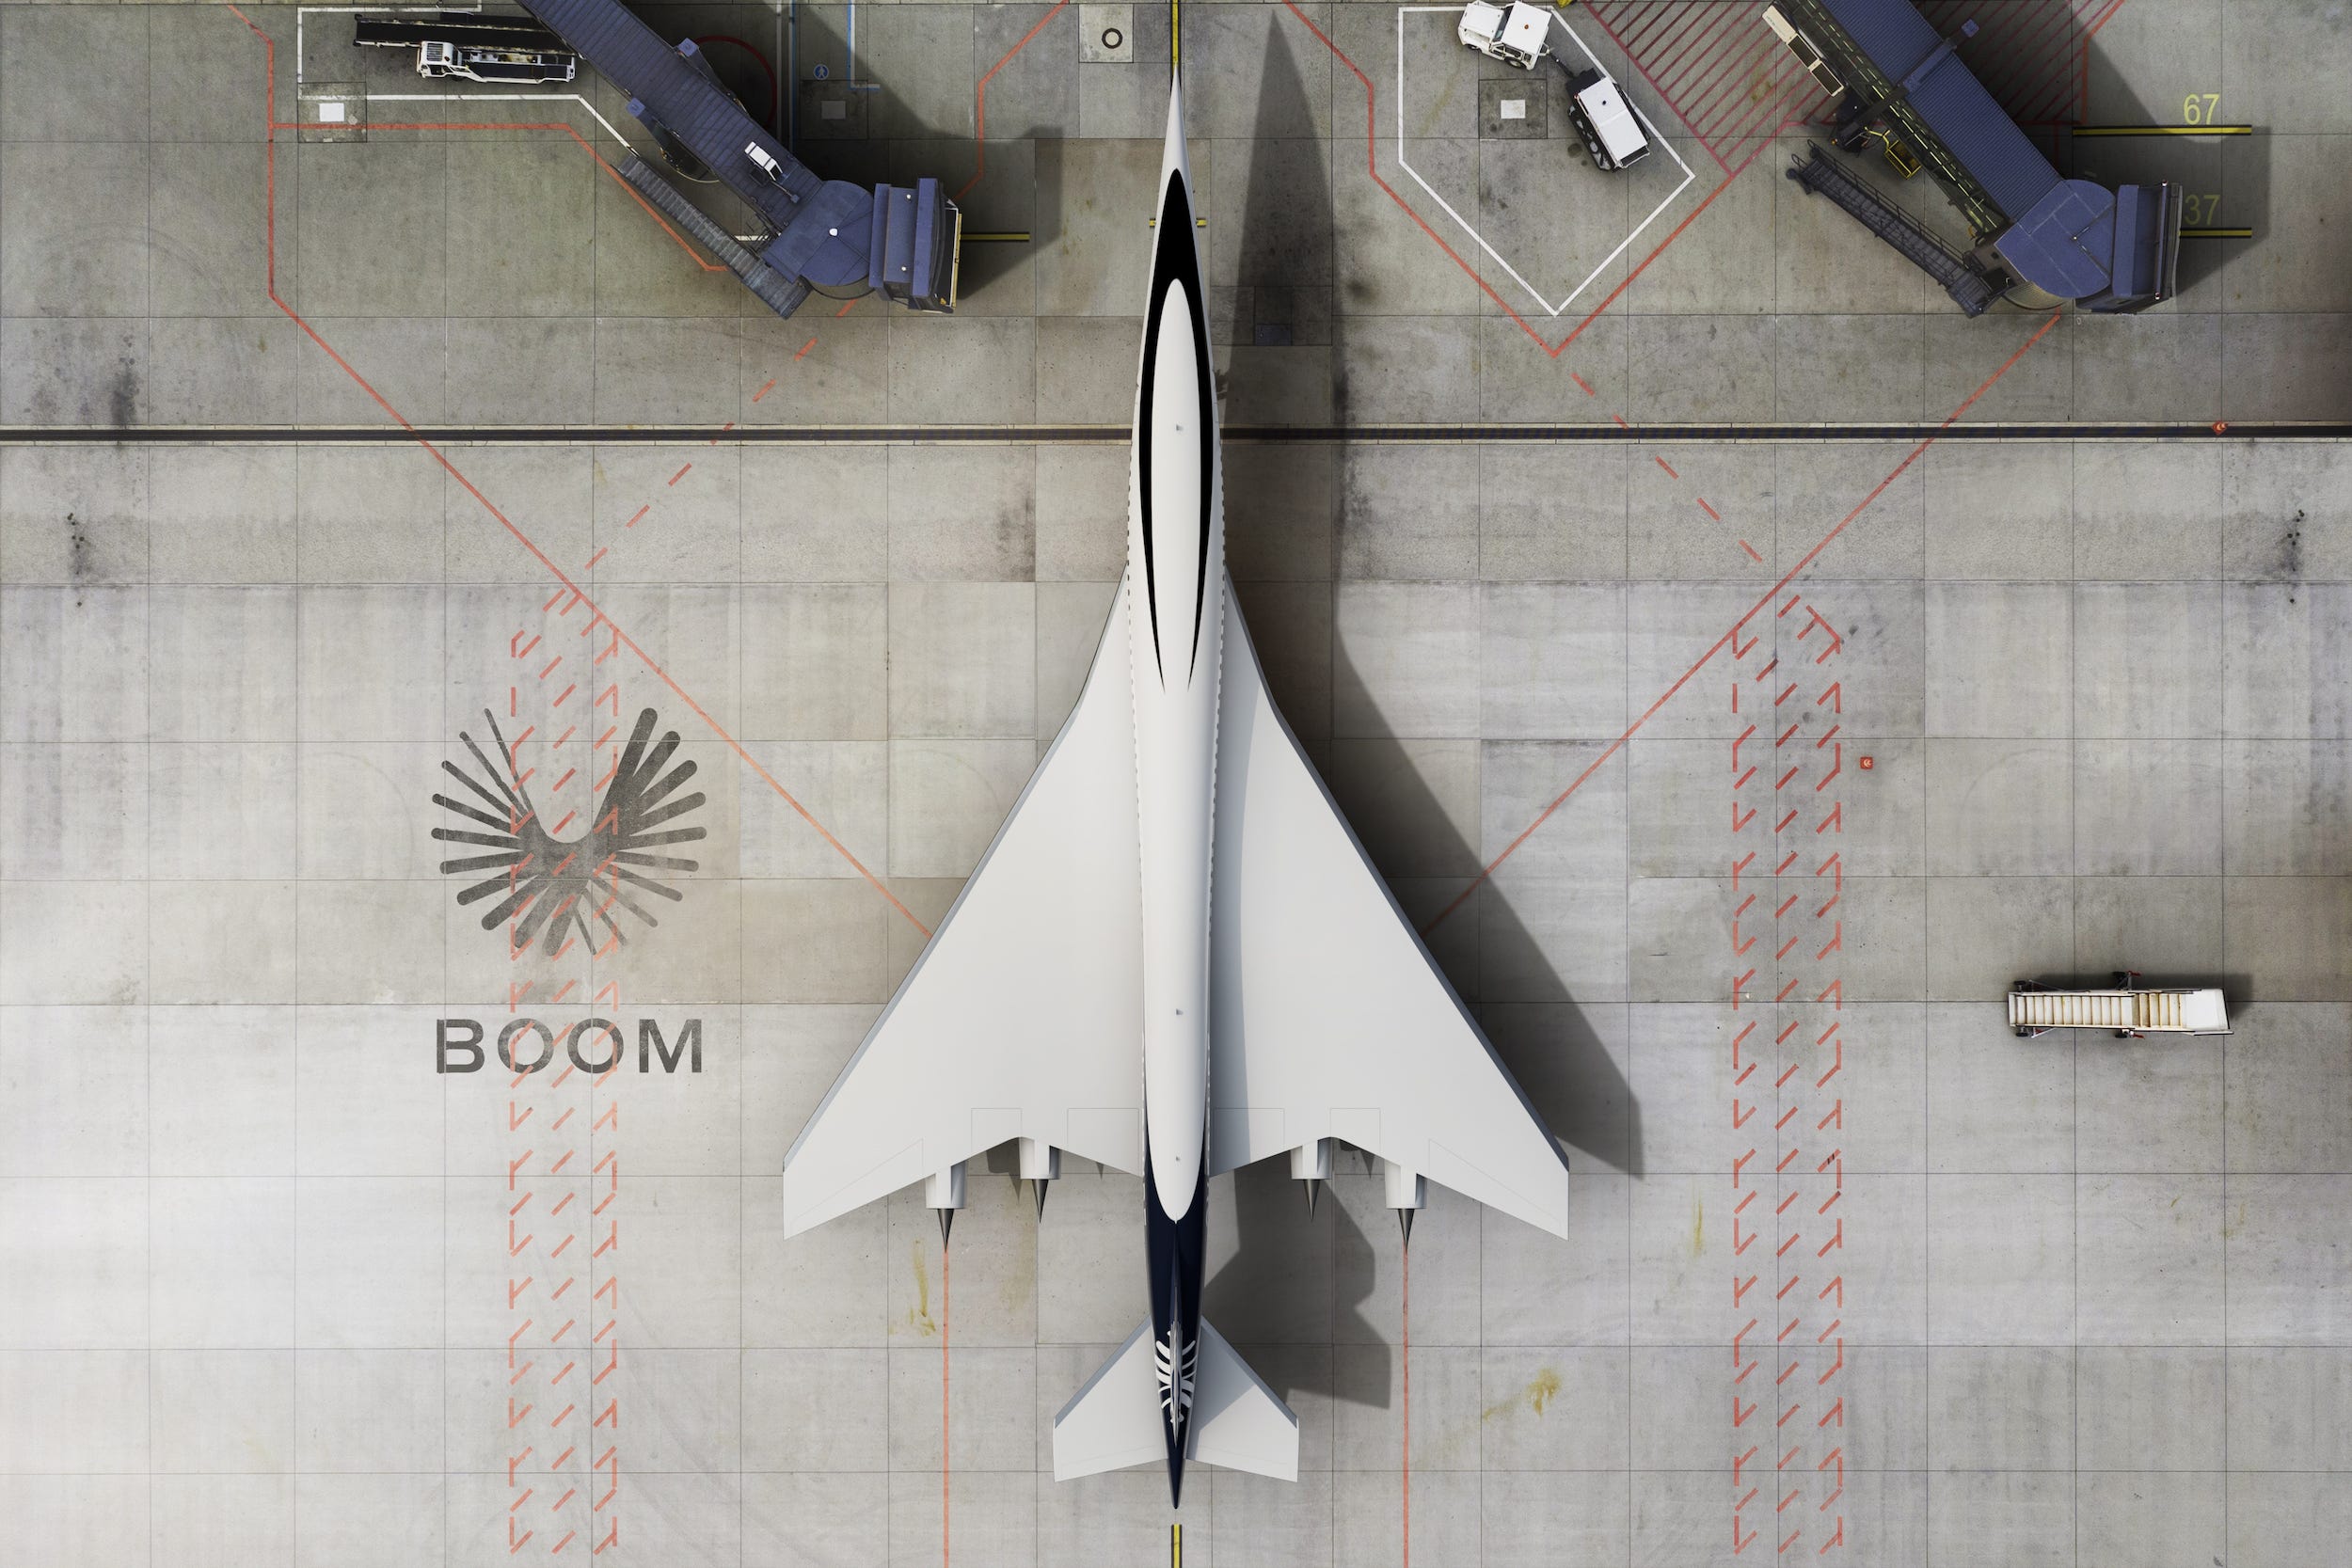 <p>The baby boom has three engines, while <a href="https://www.businessinsider.com/inside-boom-supersonics-own-symphony-engine-powering-overture-jet-2023-6">Overture will have four engines mounted on the wings.</a></p><p>Both the XB-1 and Overture are designed with gull wings, which increase safety and decrease engine strain, costs, and noise, according to Boom.</p>